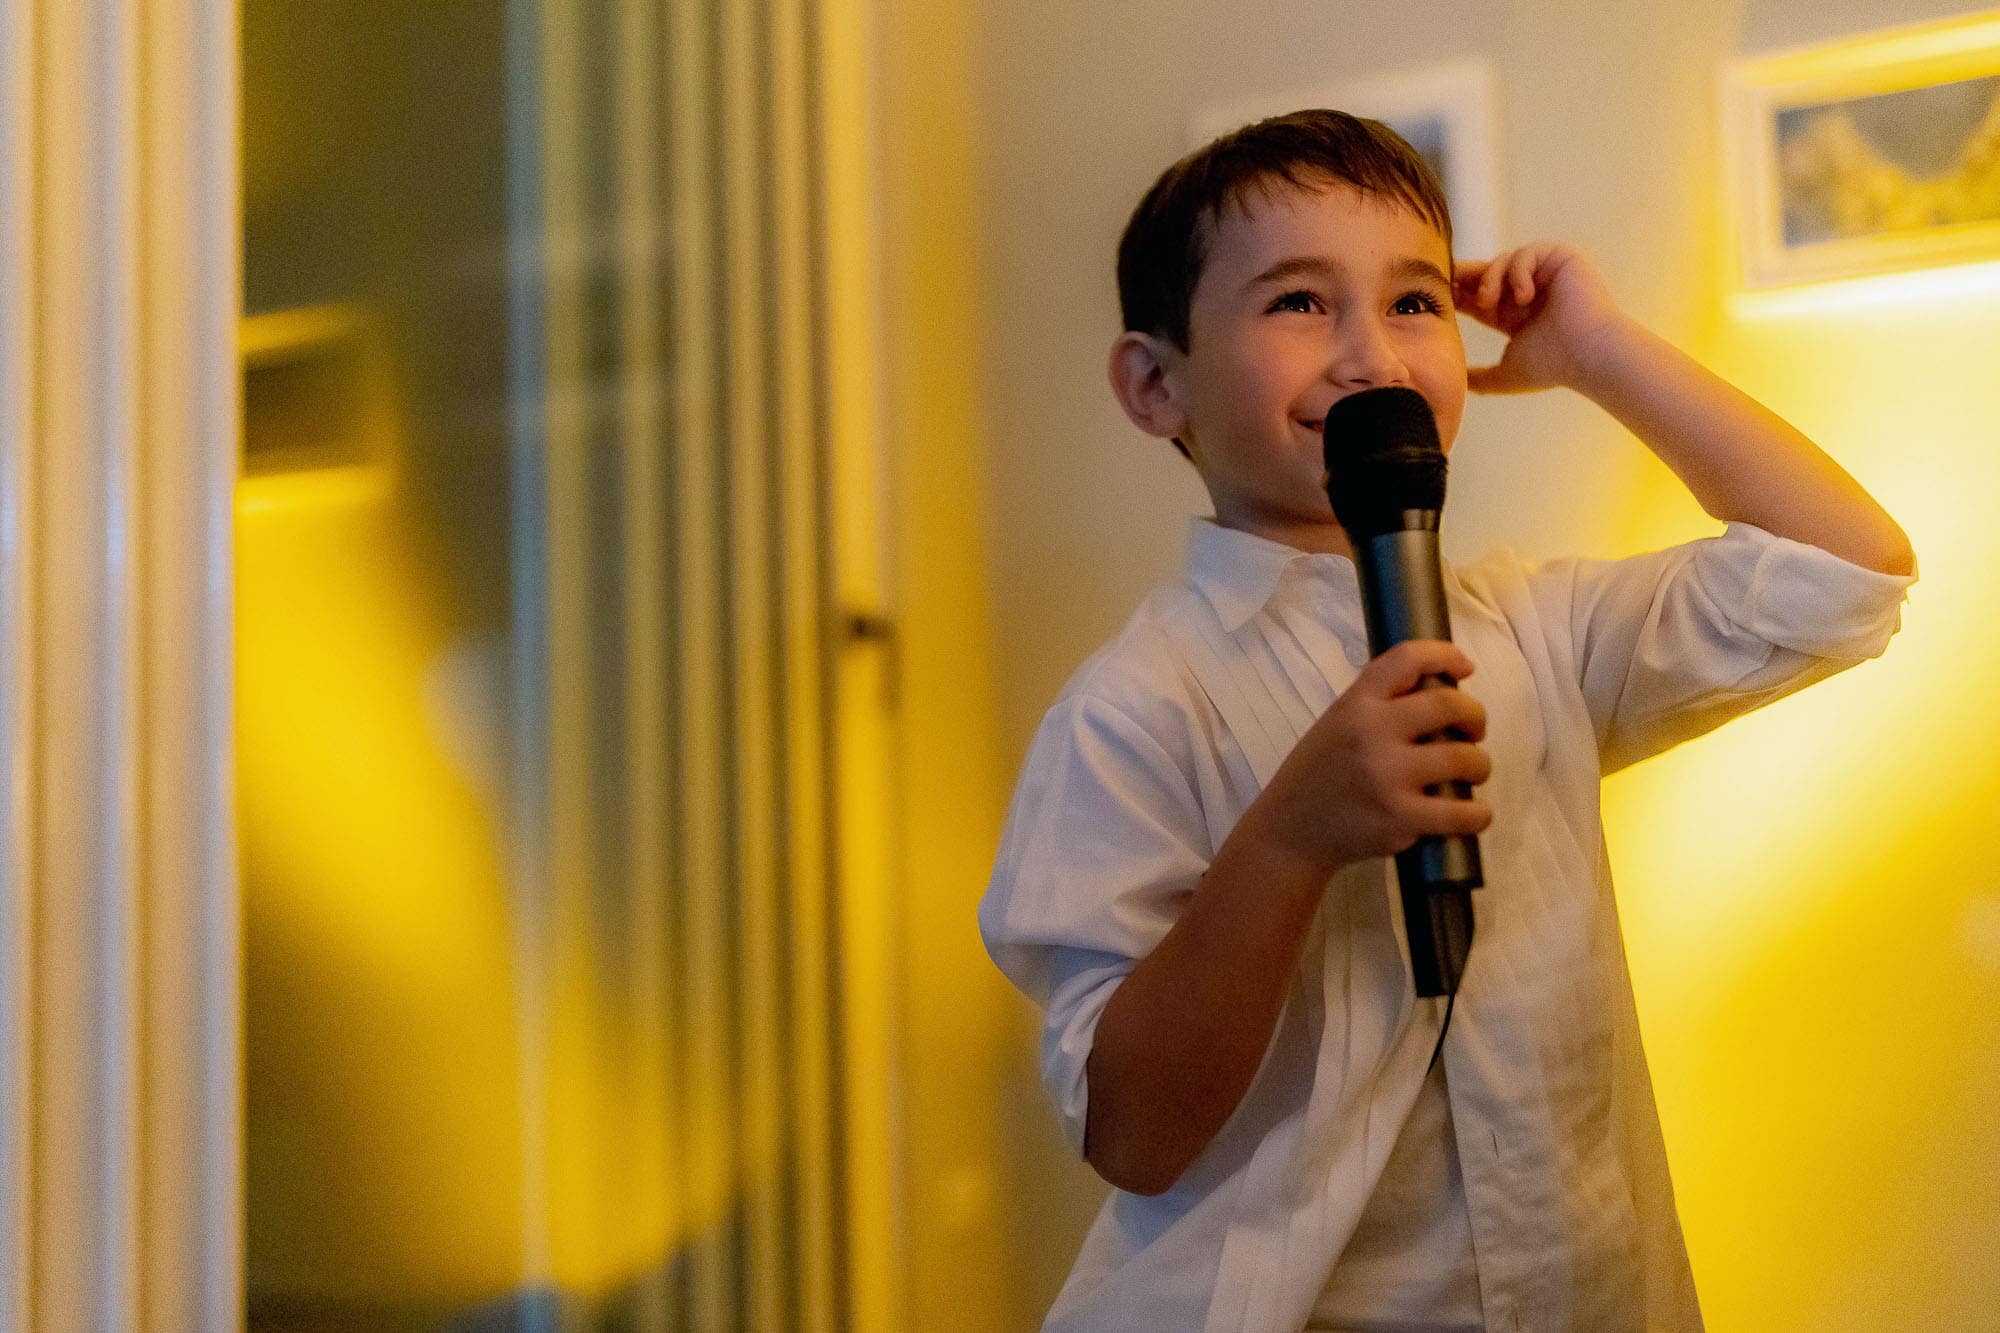 Little boy makes a toast with the mic